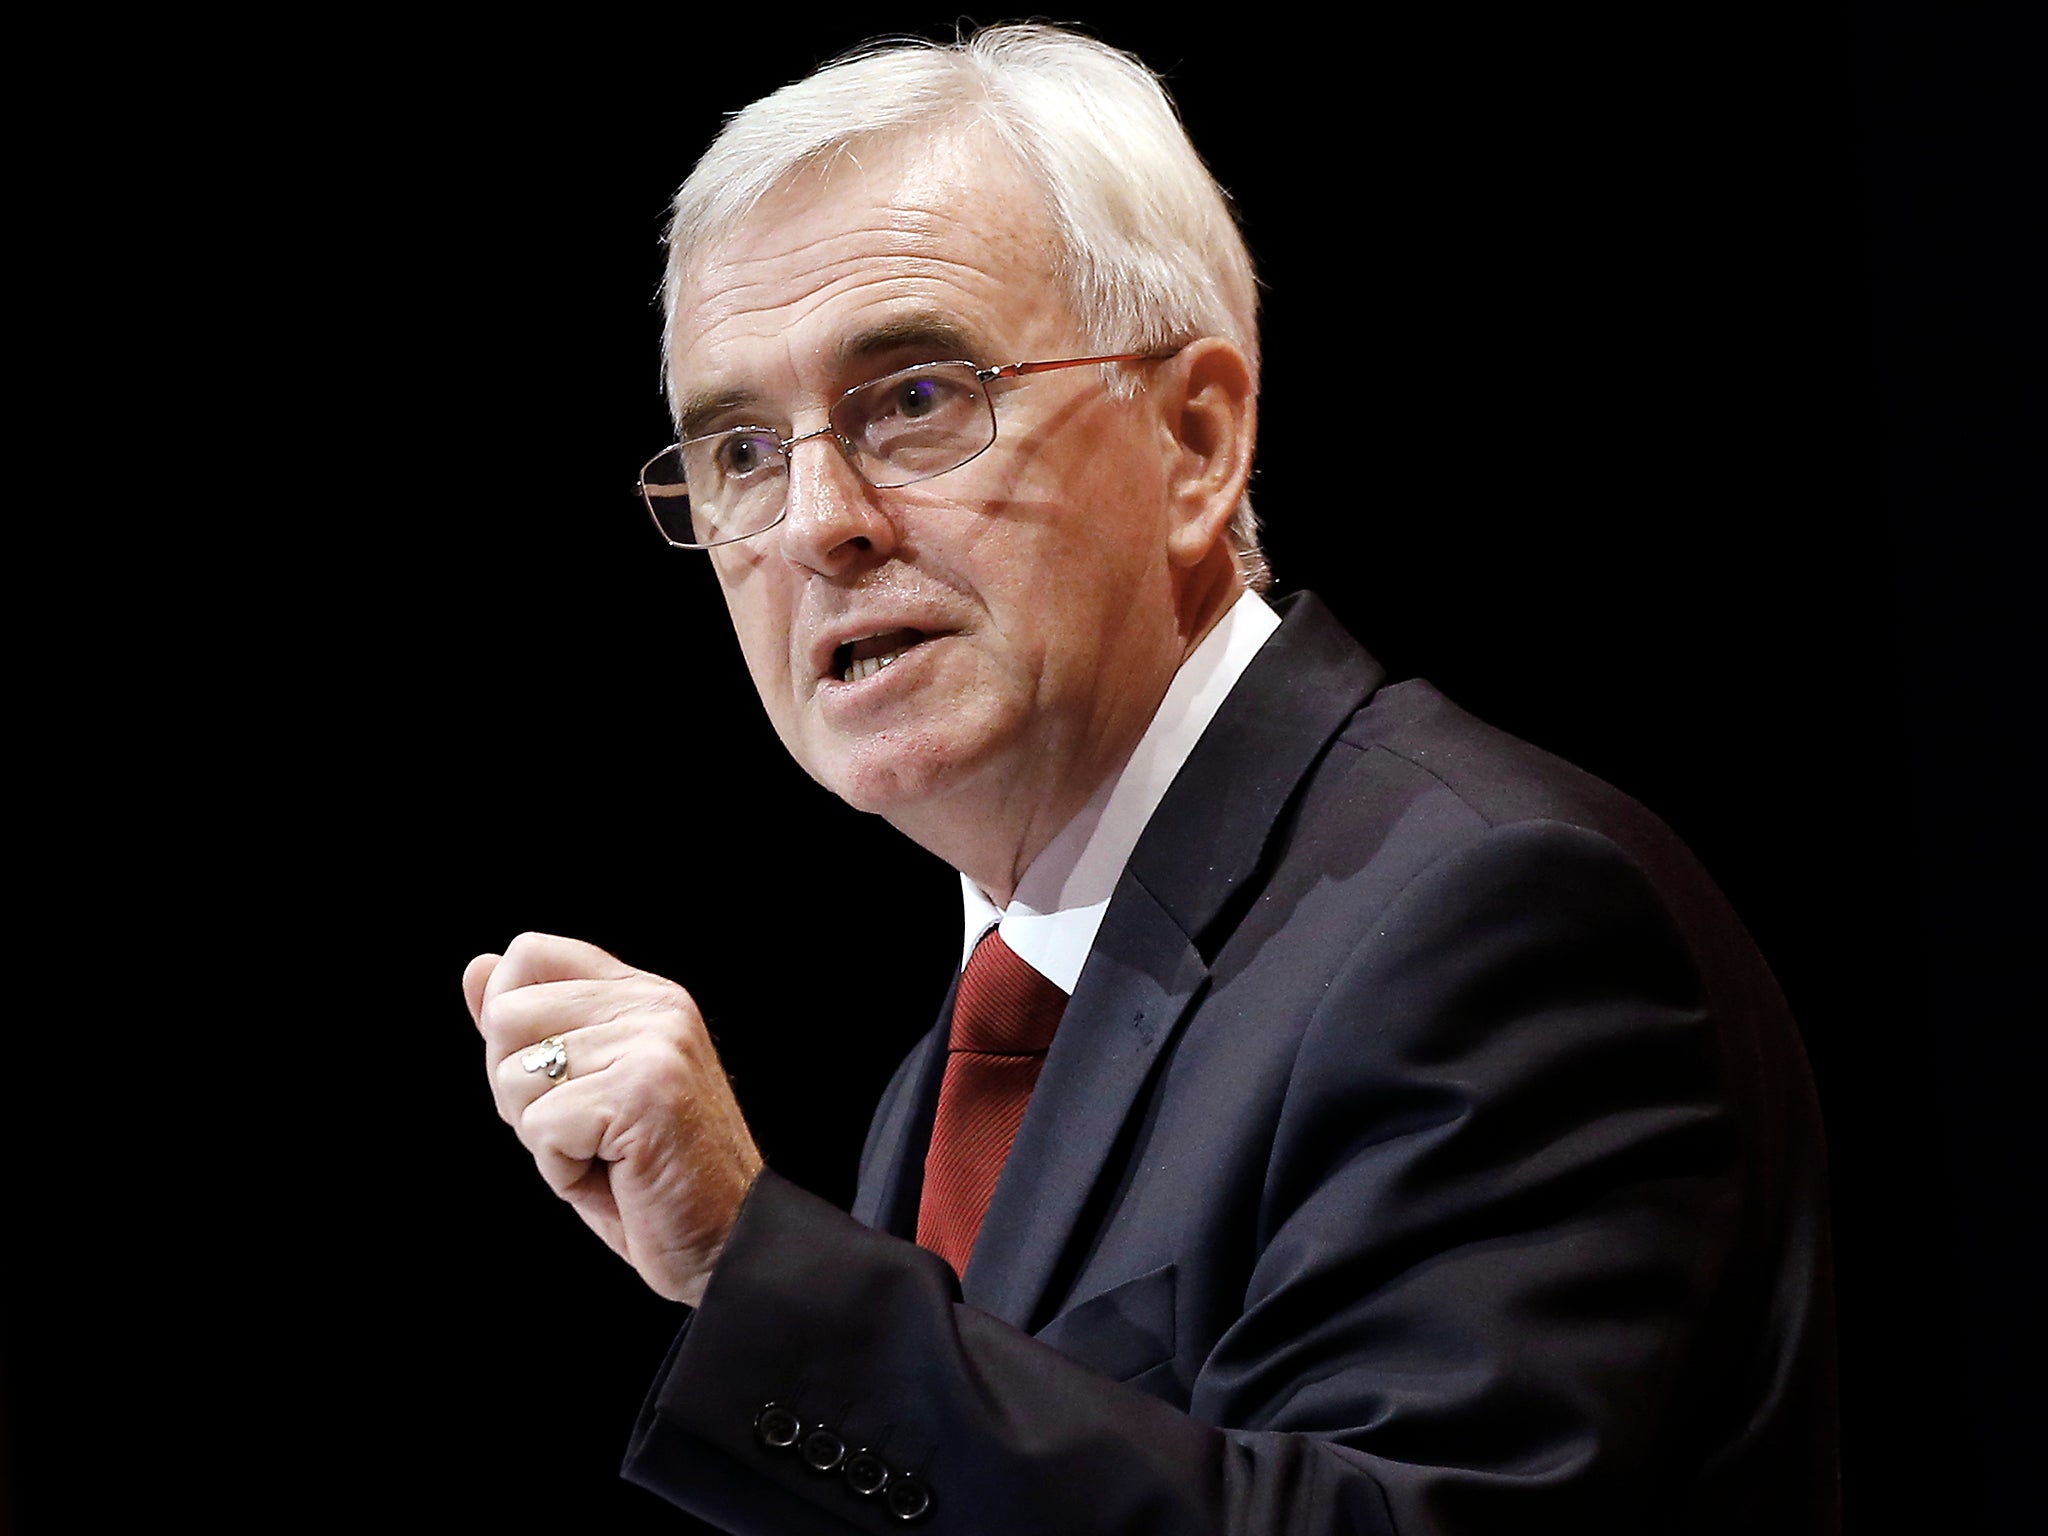 Shadow Chancellor John McDonnell has said his tax plans will target the 'rich'